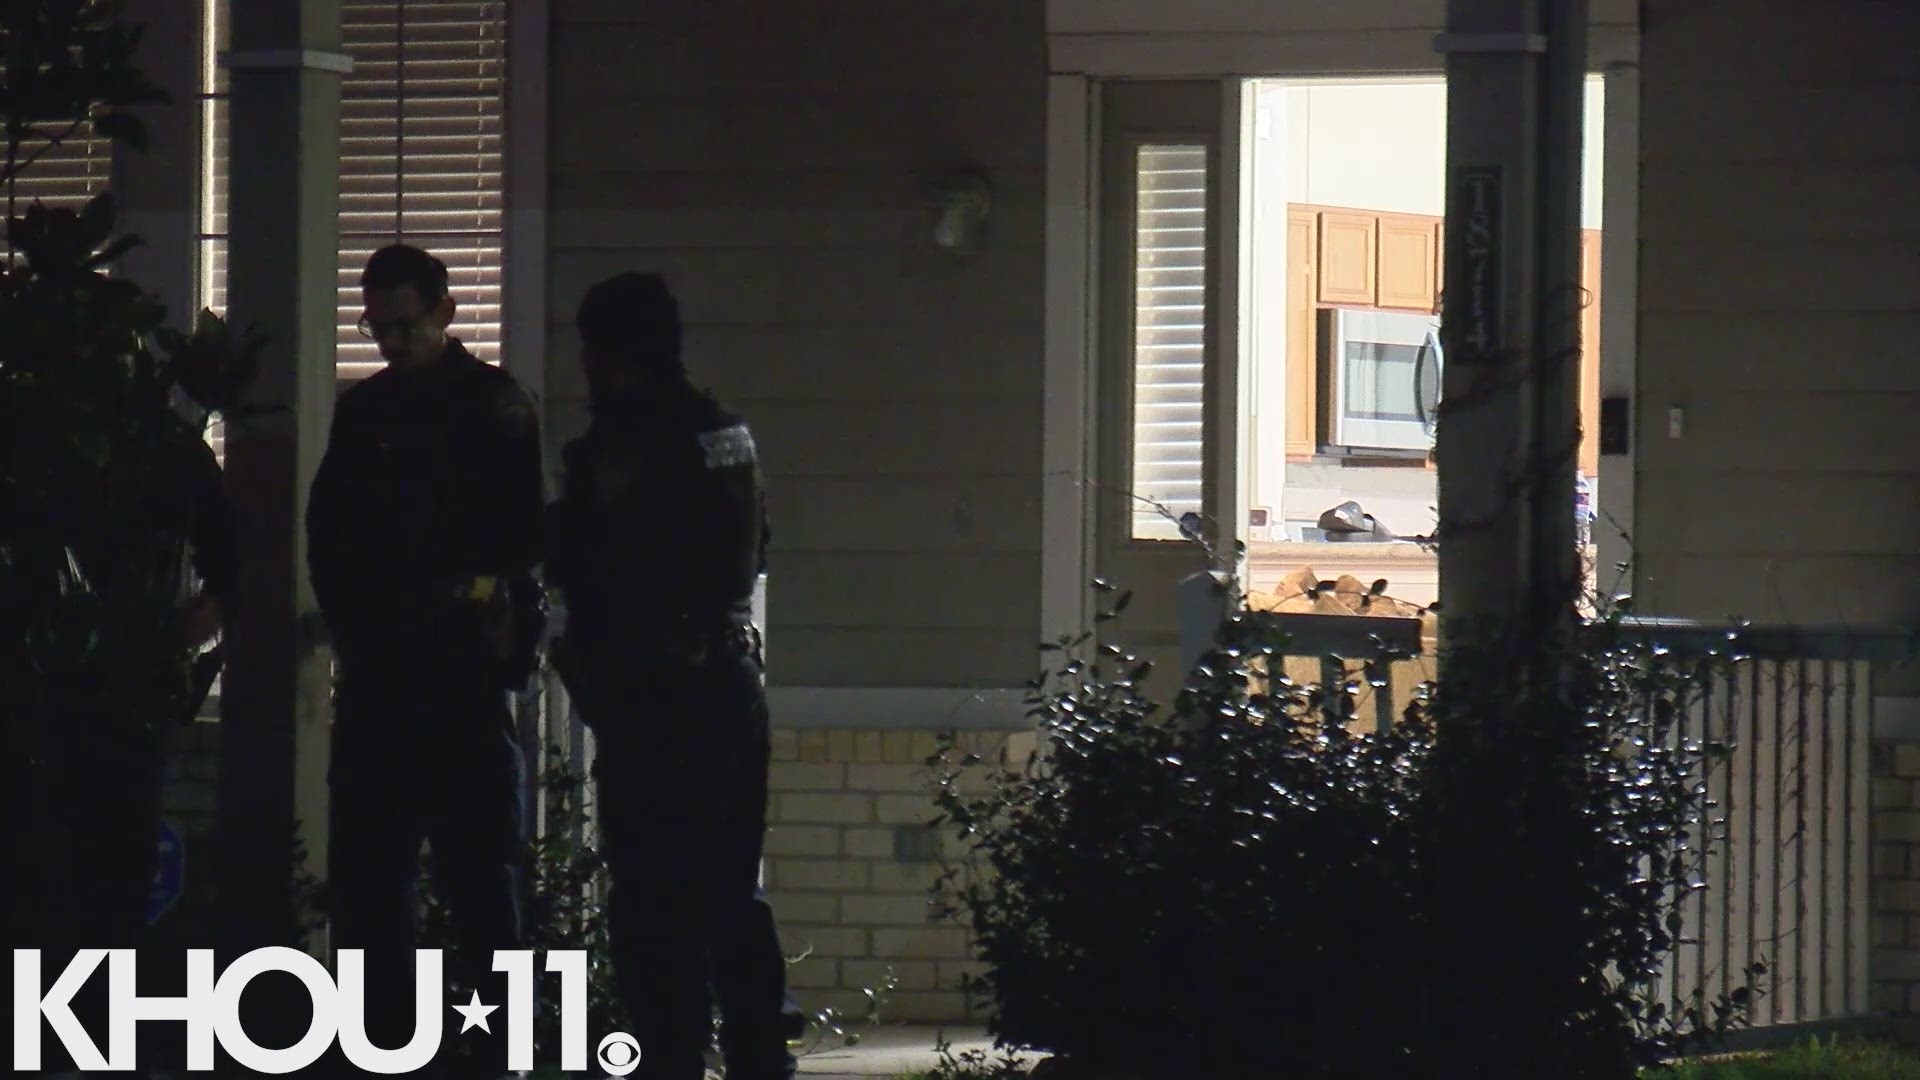 A suspect was shot during a home invasion in Katy. The suspect was shot in the arm and taken to a nearby hospital.